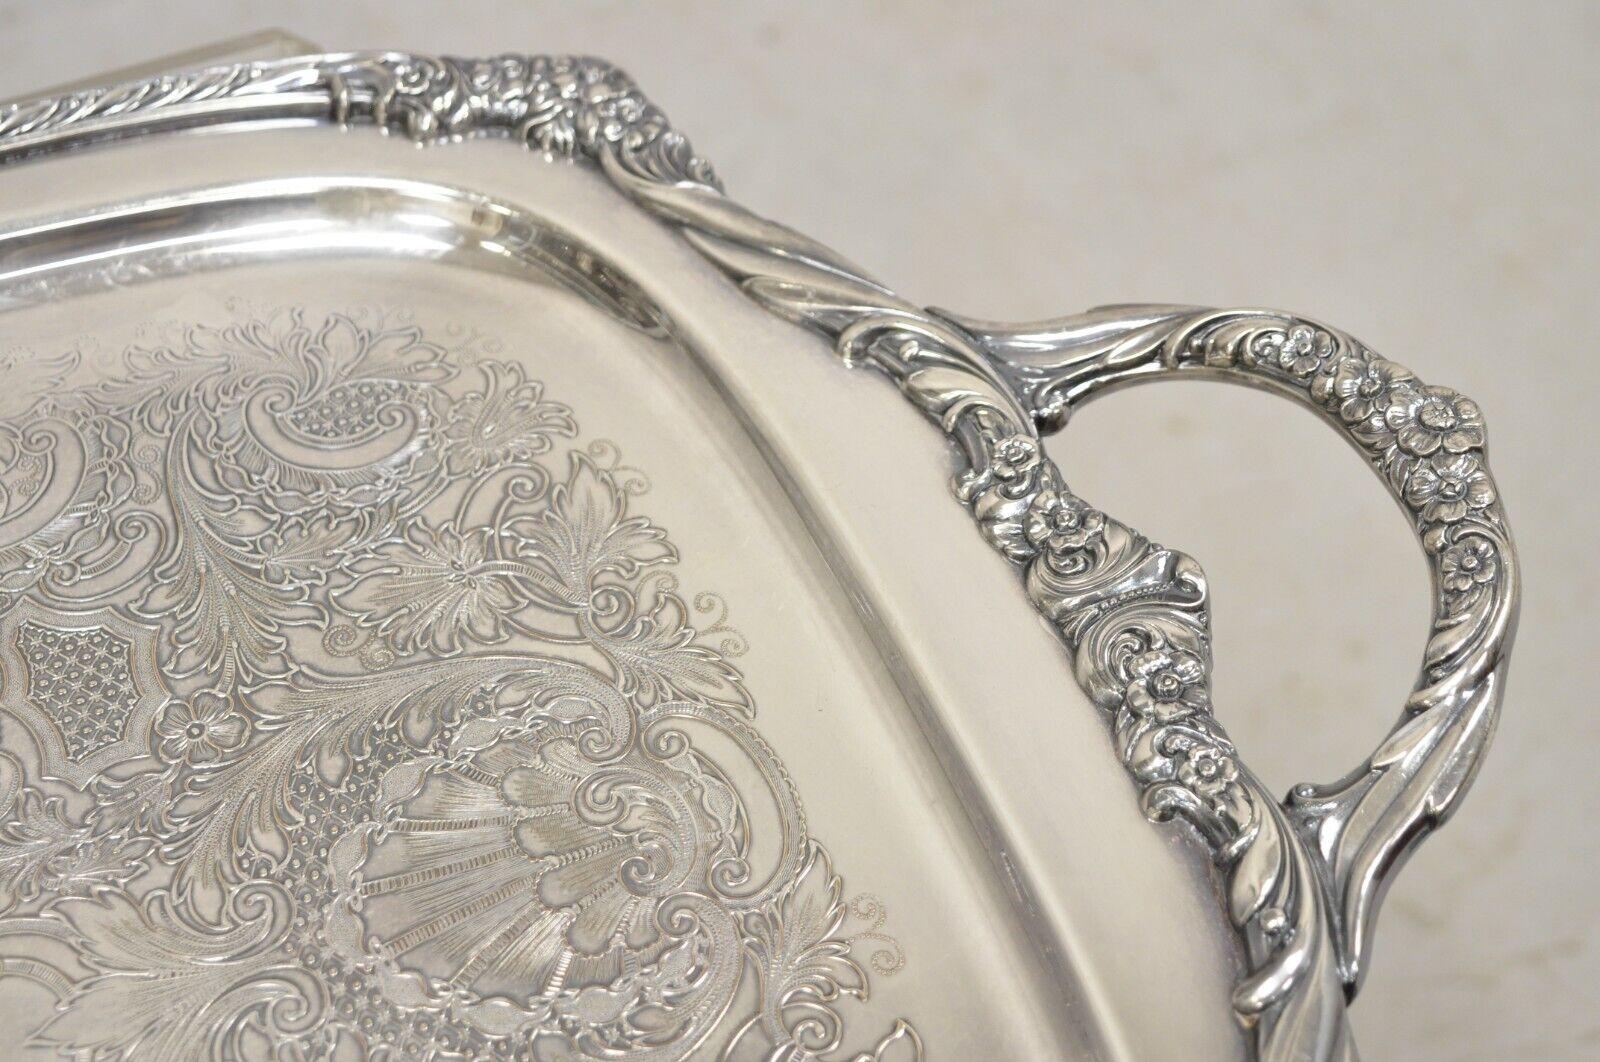 Vintage Heritage 1847 Rogers Bros 9498 Silver Plated Serving Platter Tray For Sale 6